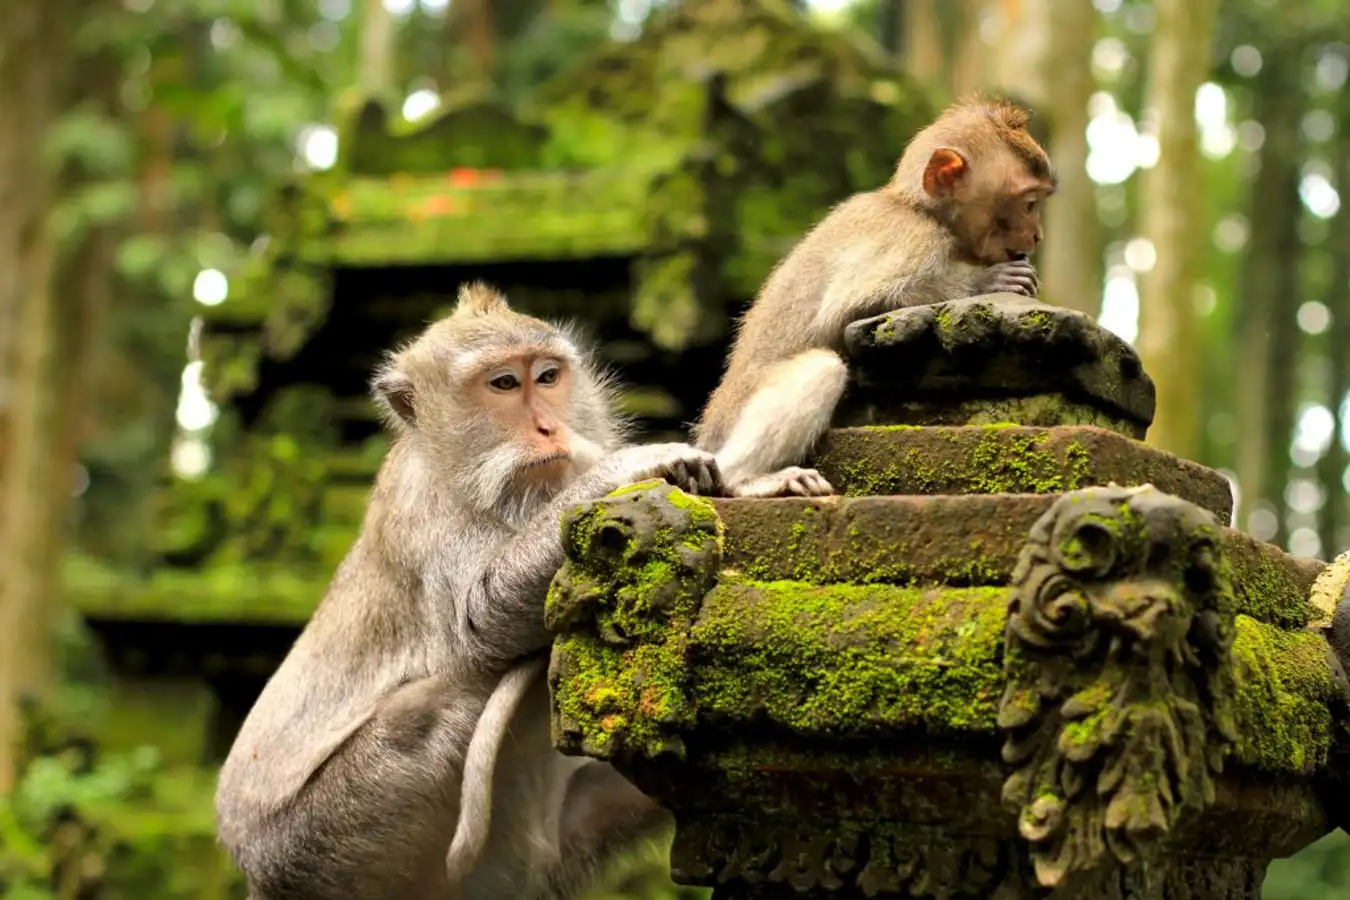 Learn about Bali’s animal diversity